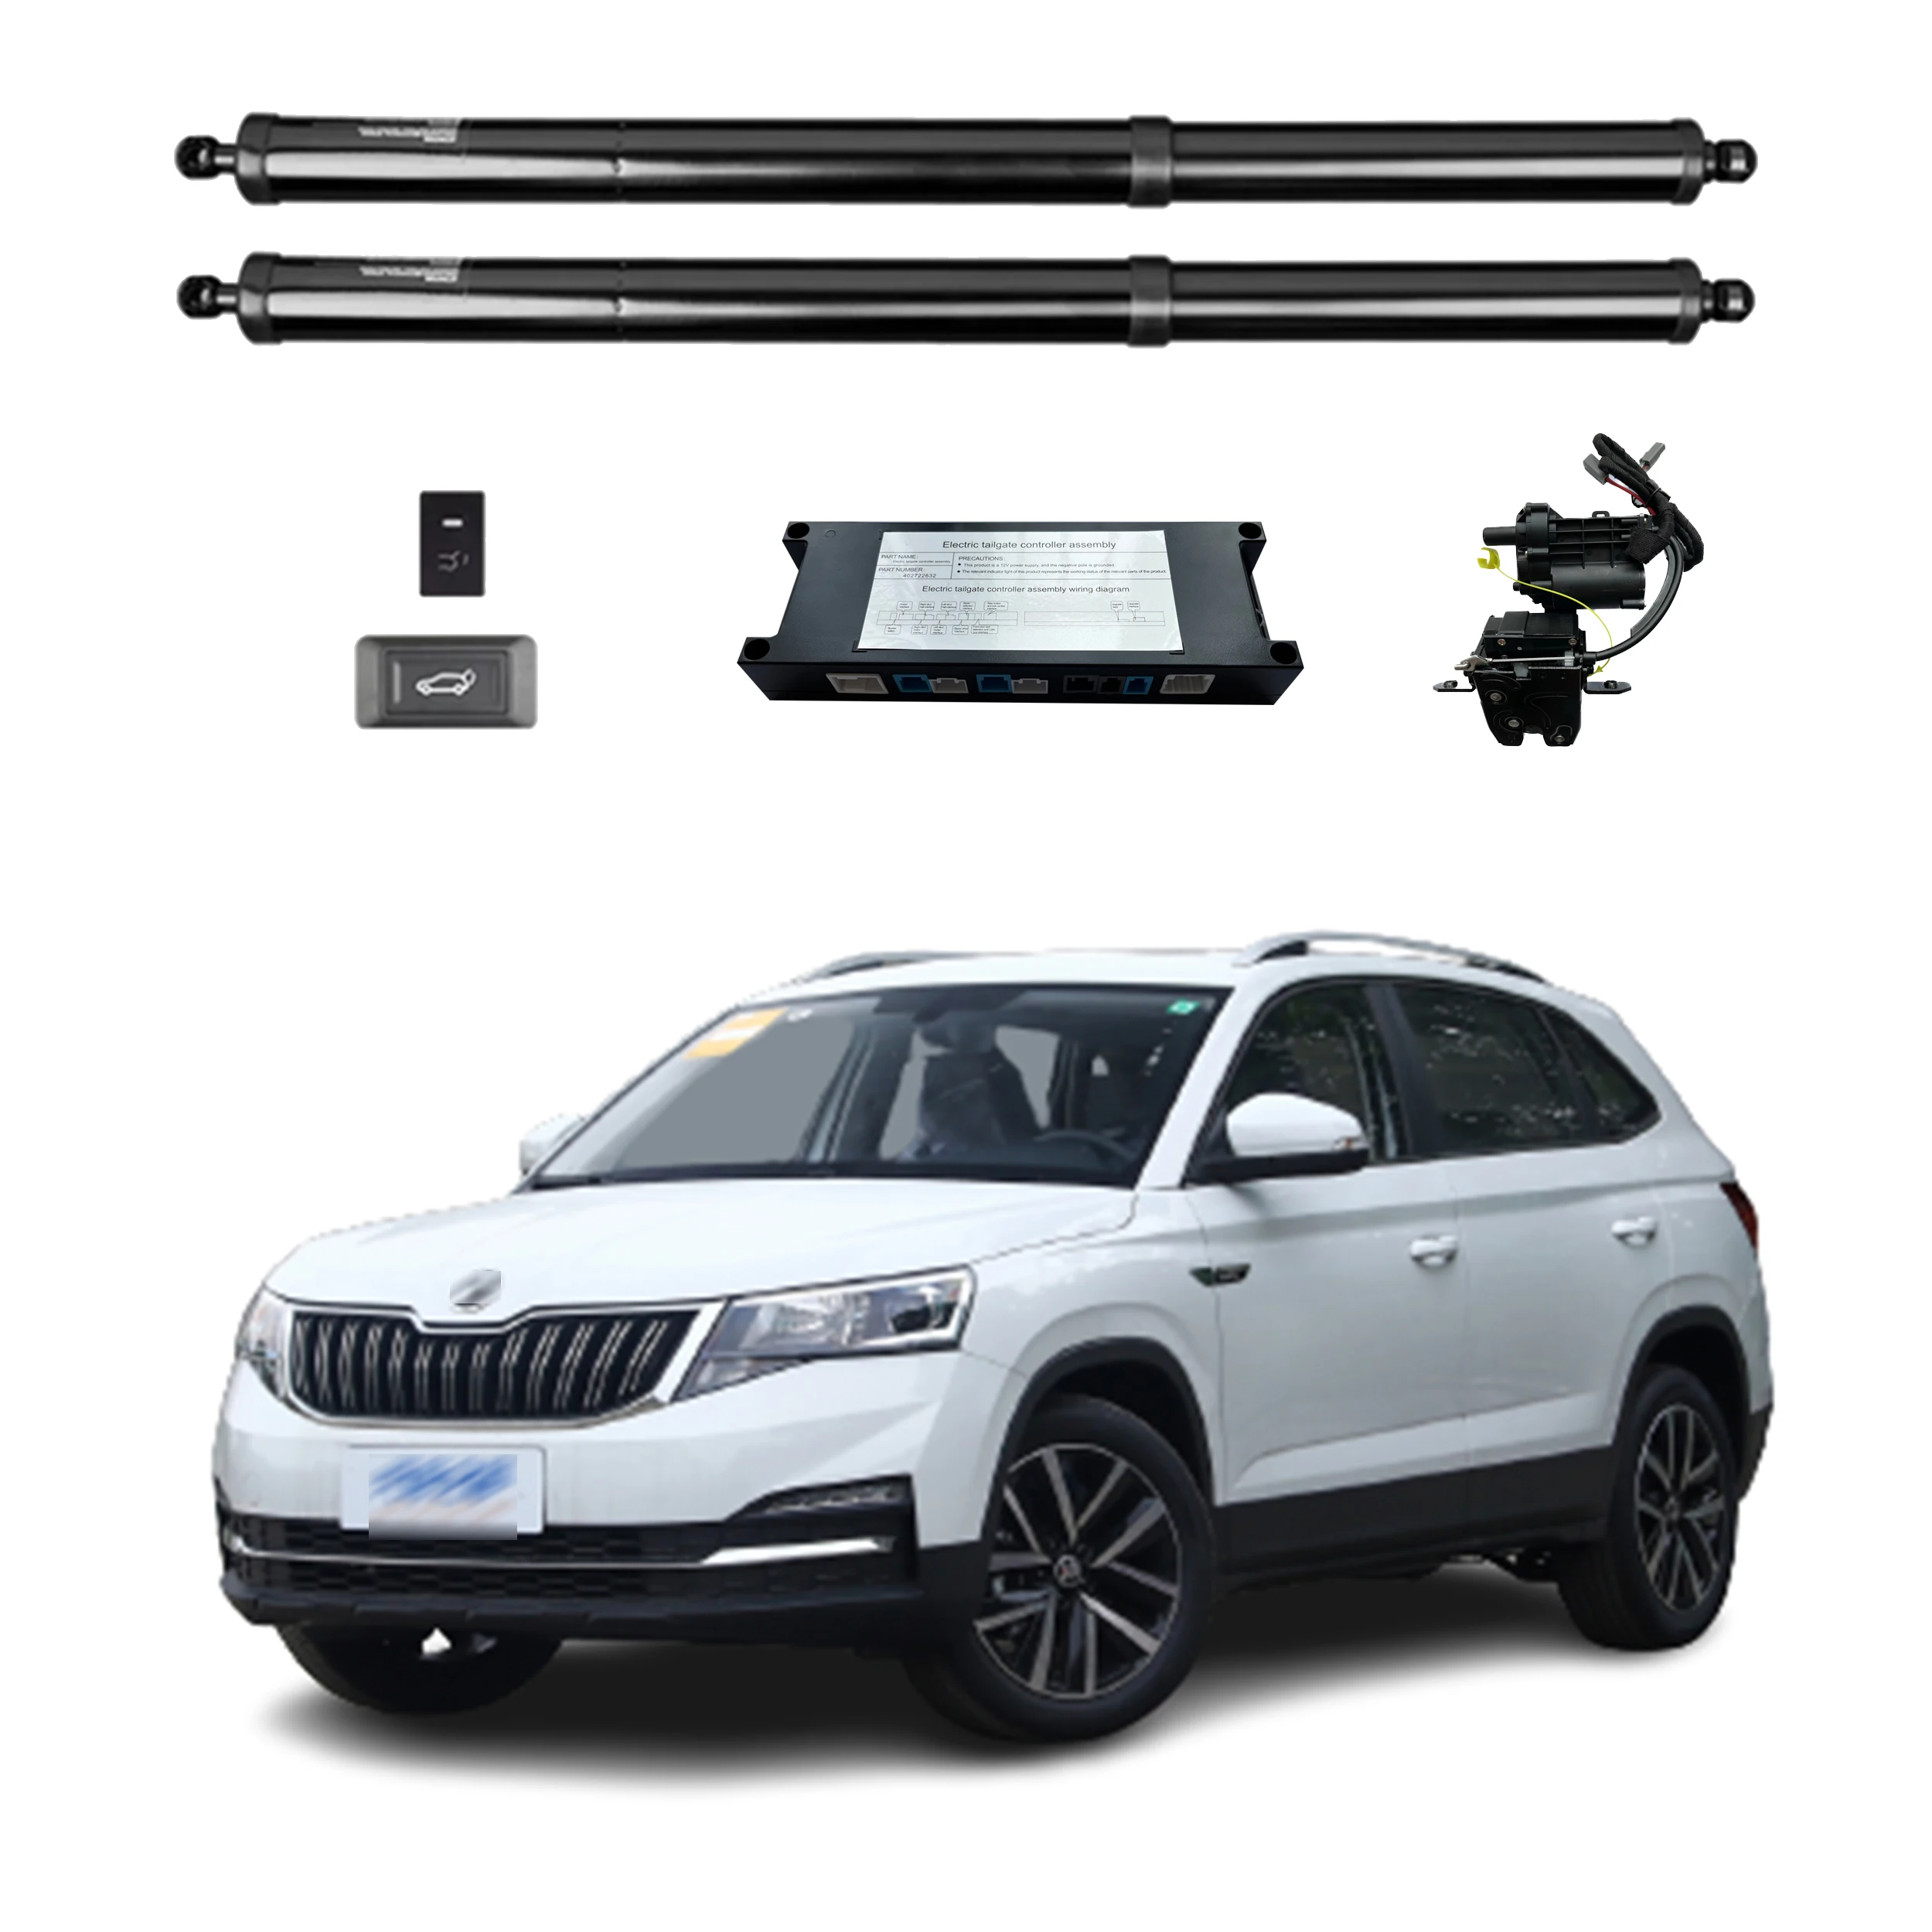 

For Skoda Kamiq 2018+ Smart Power Tailgate Rear Door Auto Trunk With Remote Control Hands-Free Foot-Activated Optional